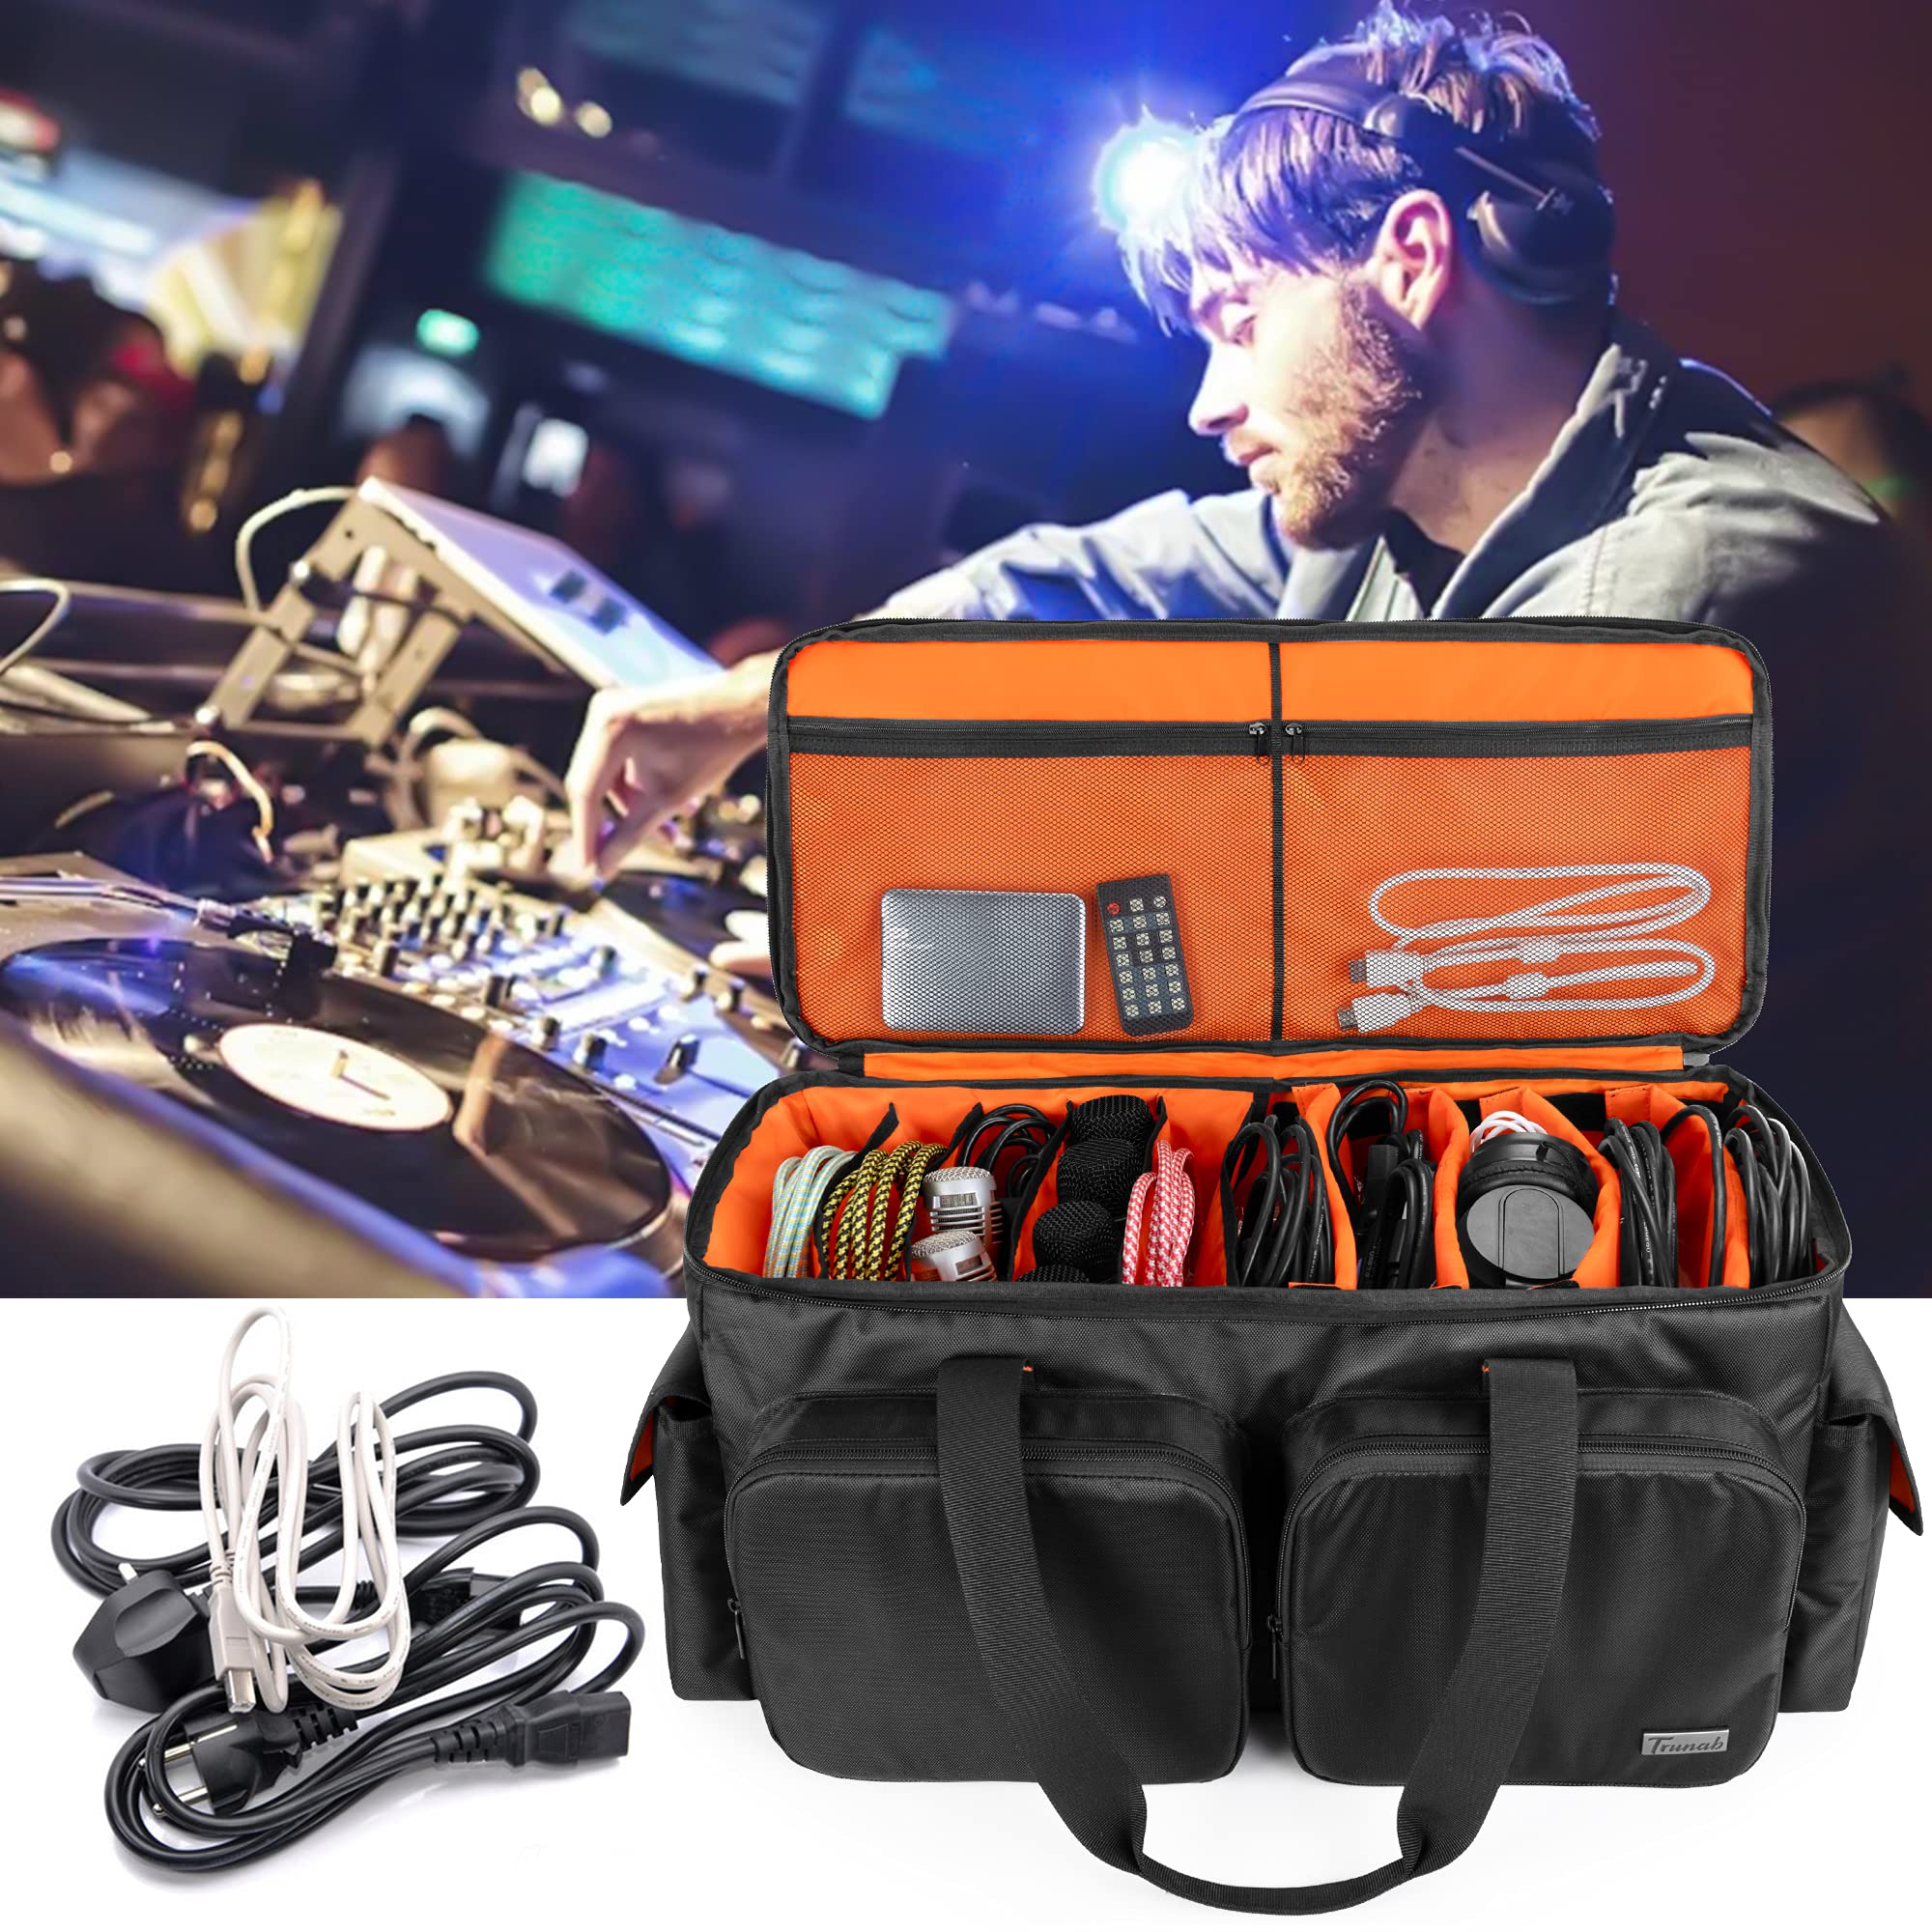 Trunab DJ Cable File Bag with Detachable Padded Bottom and Dividers, Travel Gig Bag for Professional DJ Gear, Musical Instrument and Accessories